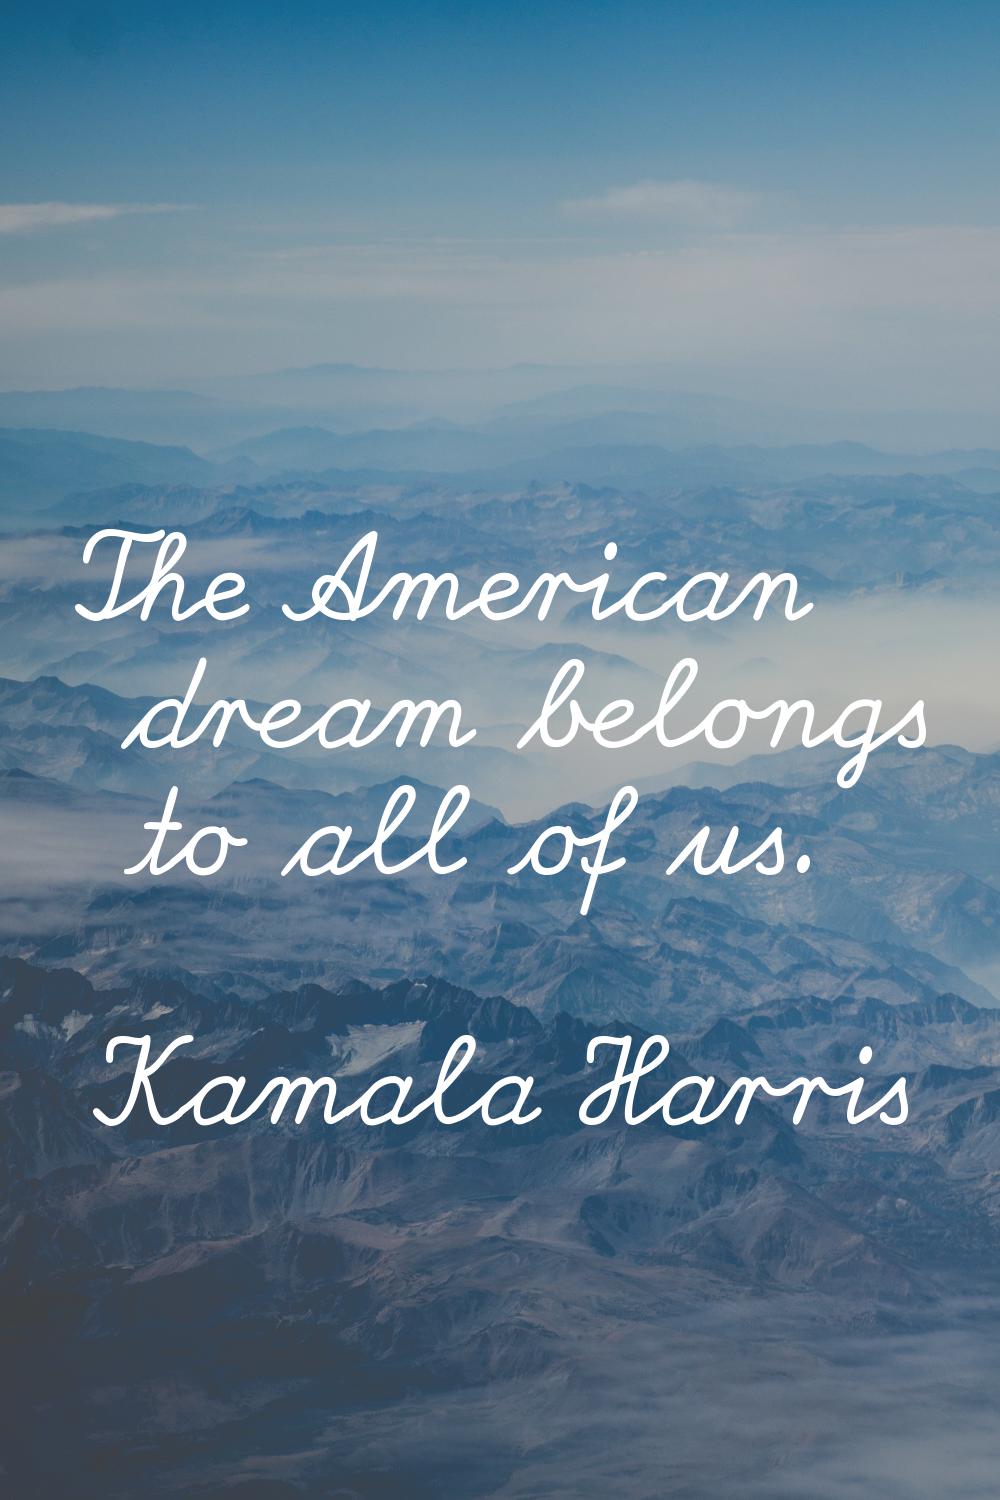 The American dream belongs to all of us.